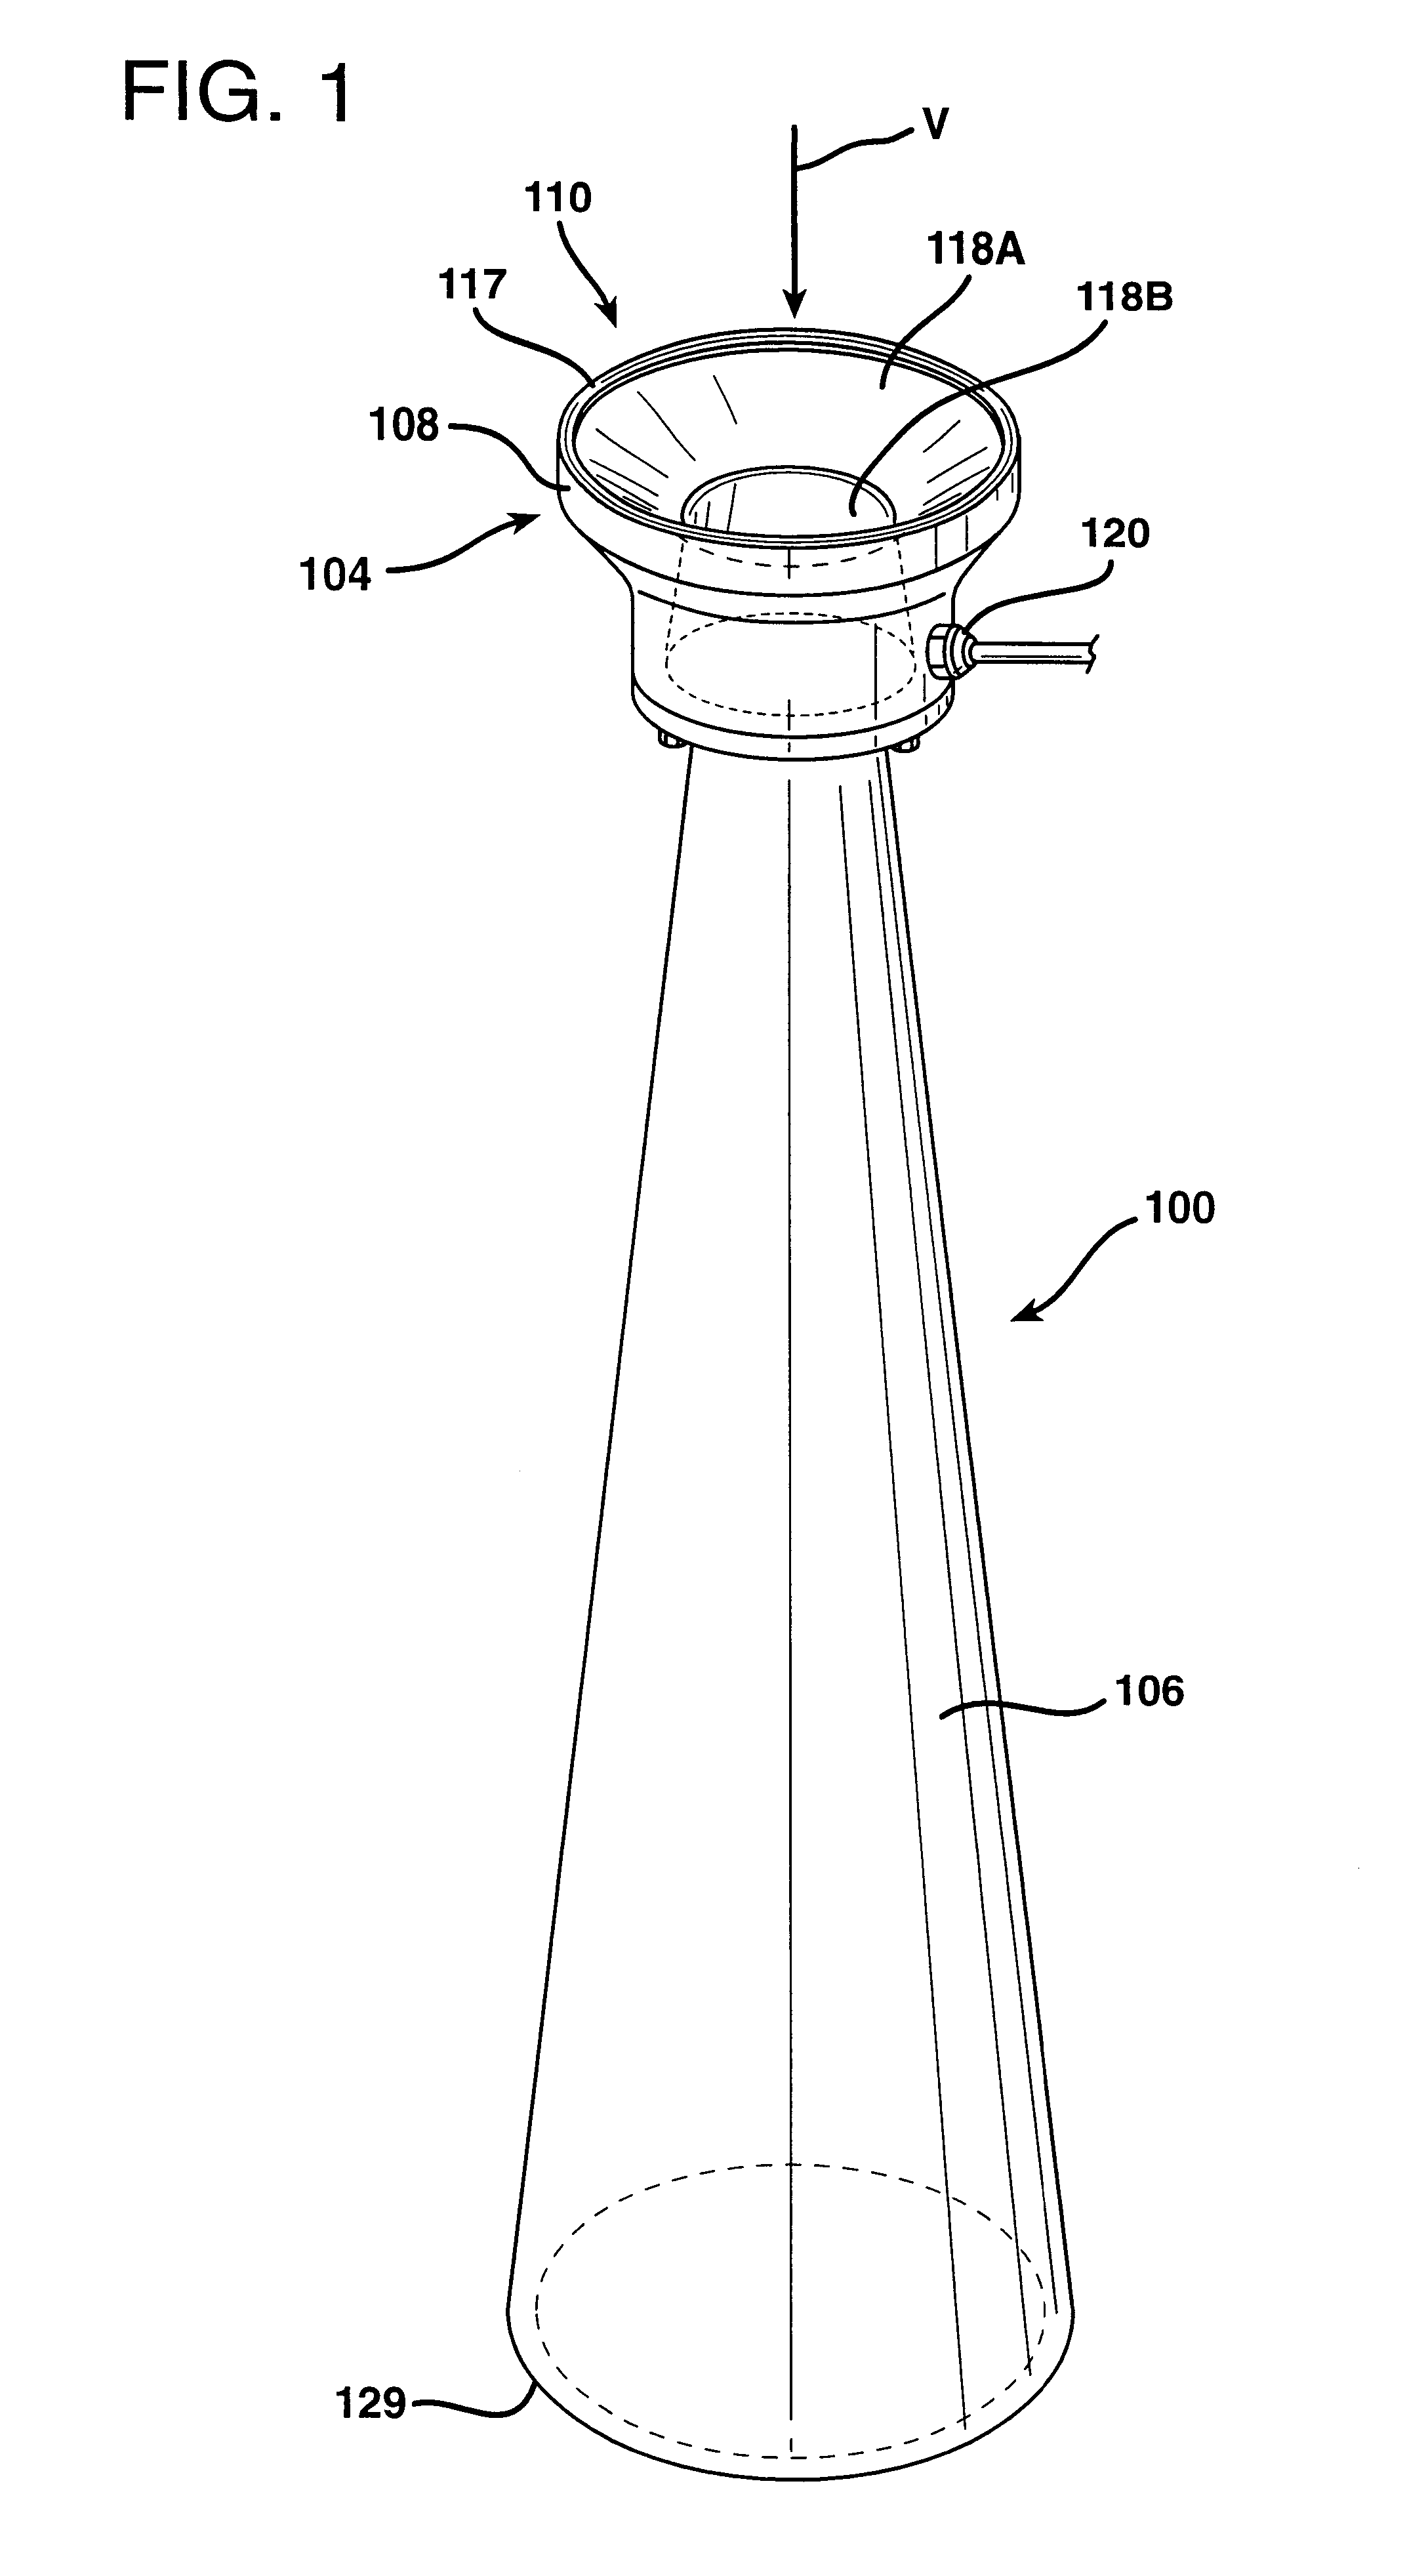 Apparatus to control the dispersion and deposition of chopped fibrous strands